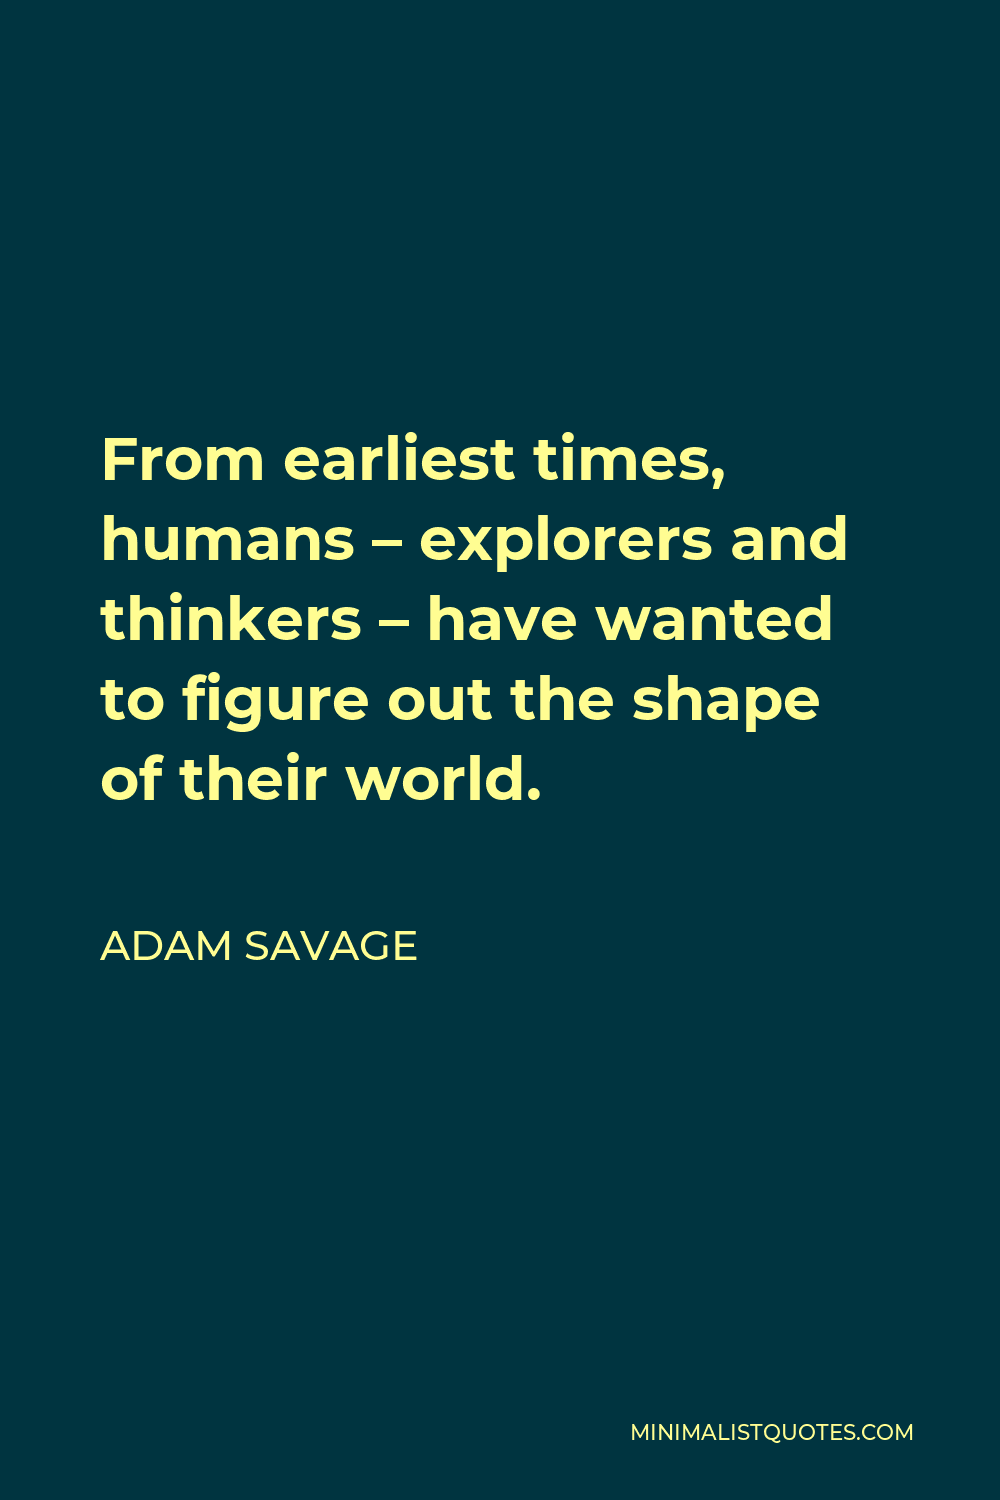 Adam Savage Quote - From earliest times, humans – explorers and thinkers – have wanted to figure out the shape of their world.